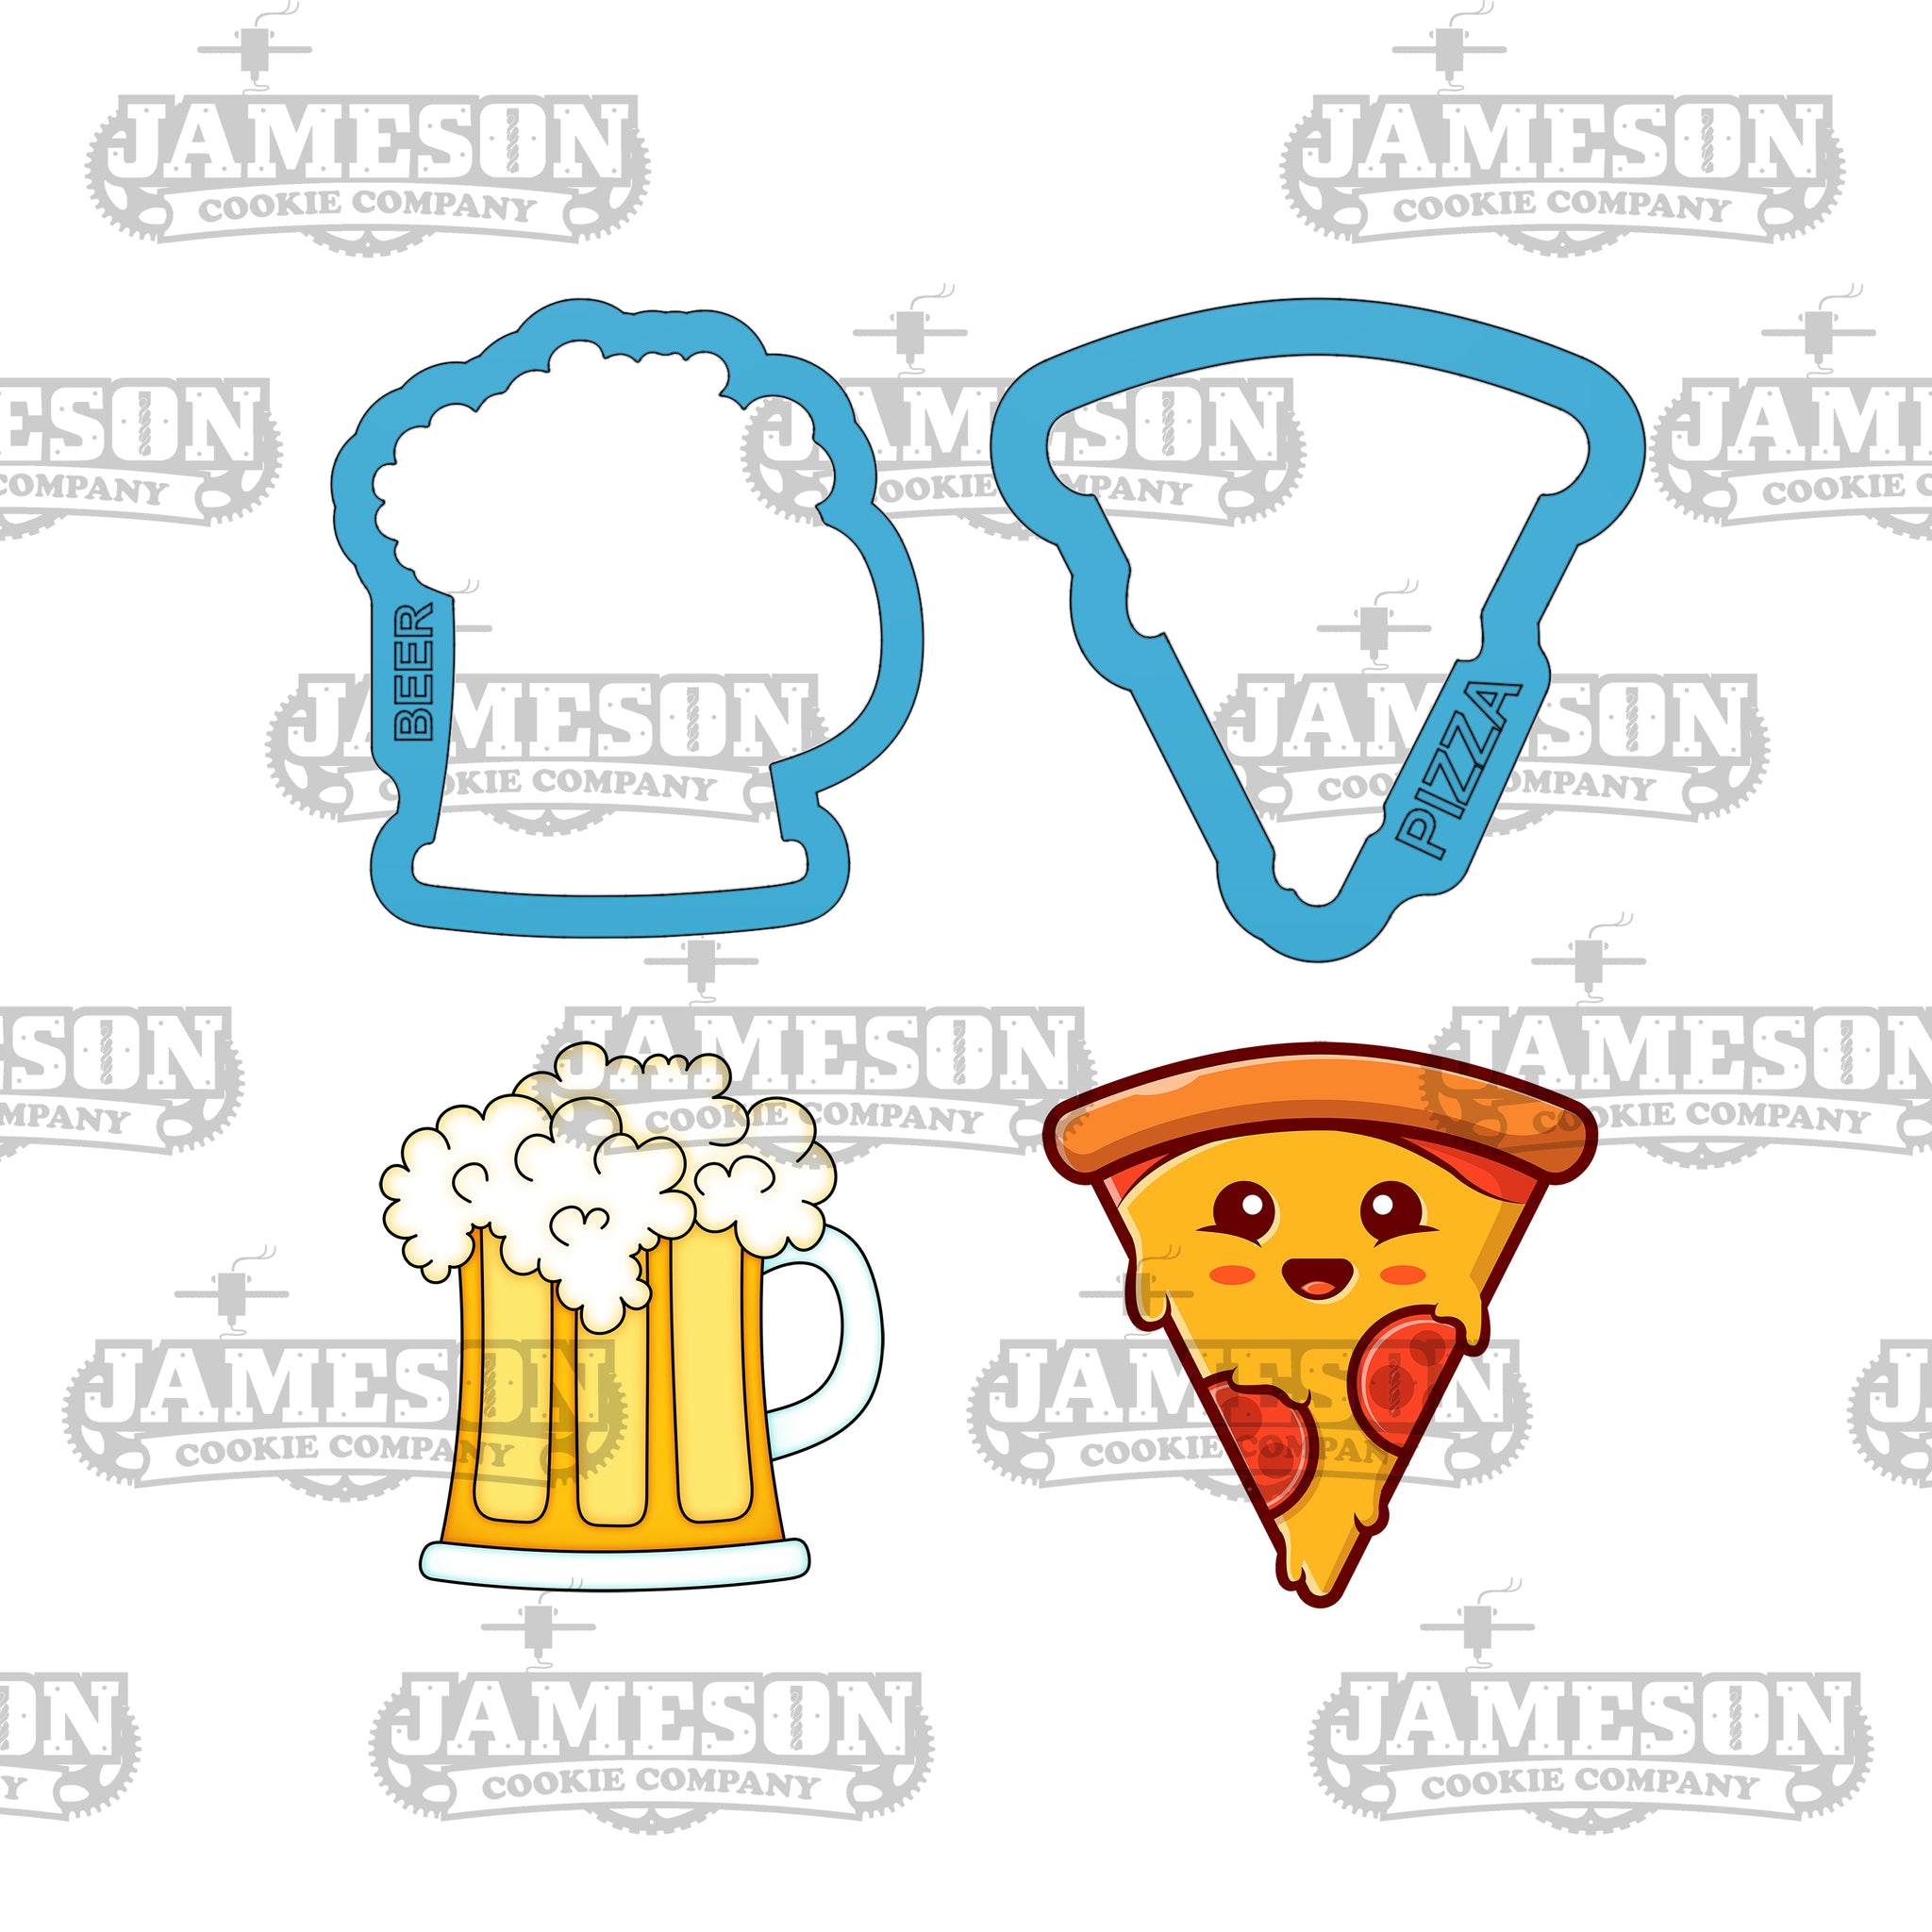 Beer Mug and Pizza Slice, 2-piece Cookie Cutter Set - Perfect Pair Version, Go Together Like, Food Cookie Cutters